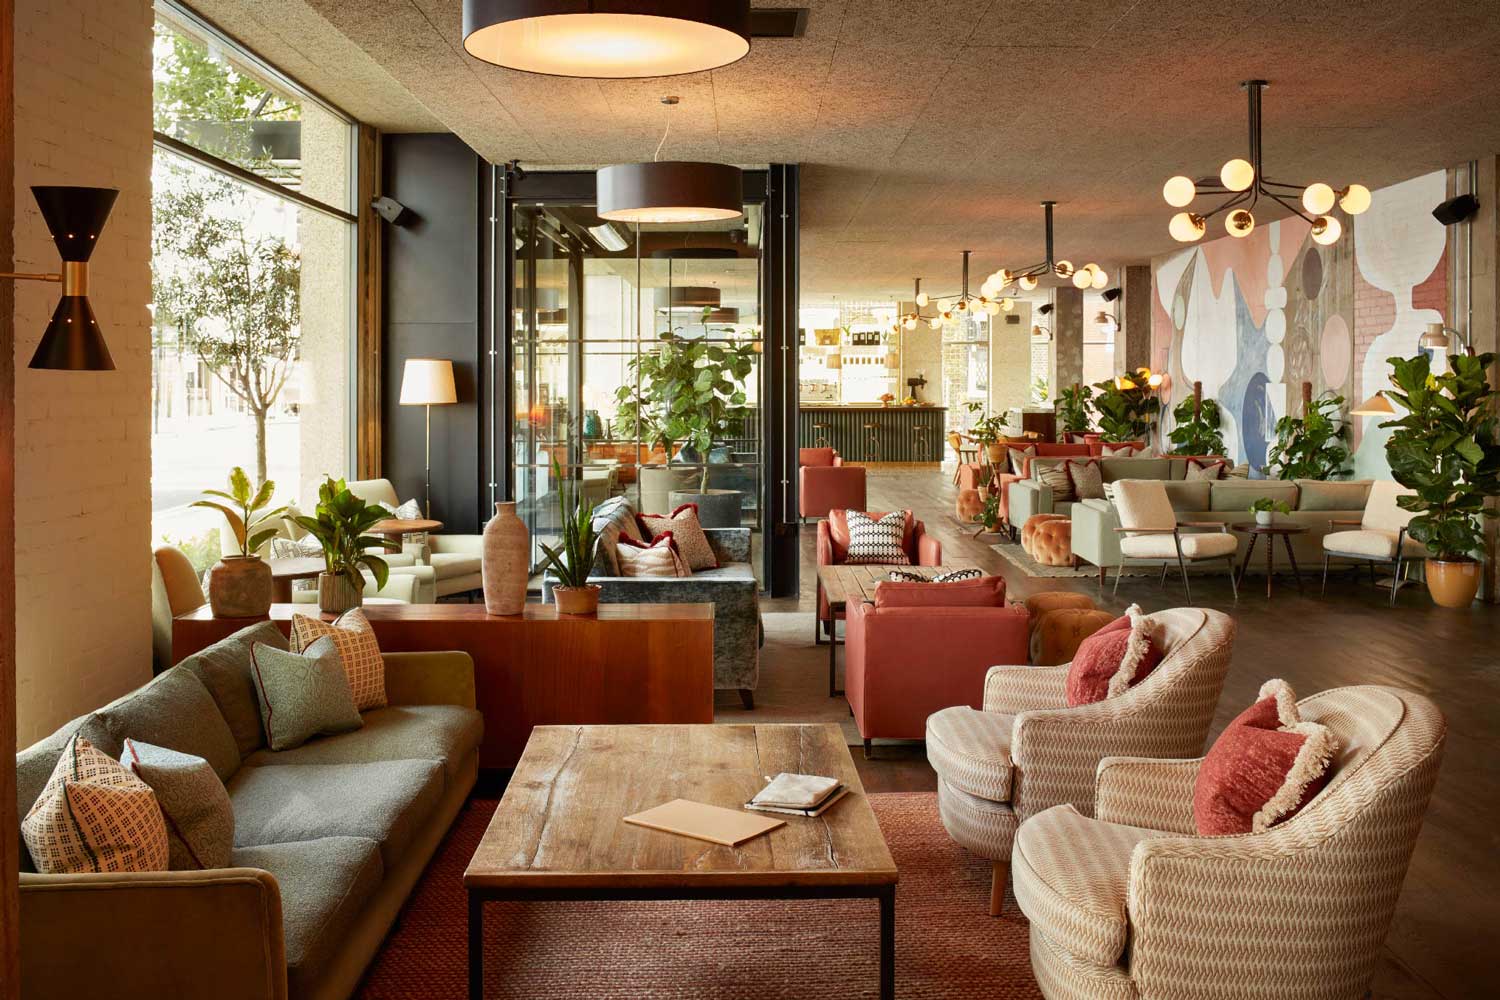 Lobby of Holborn hotel, redone in 2020